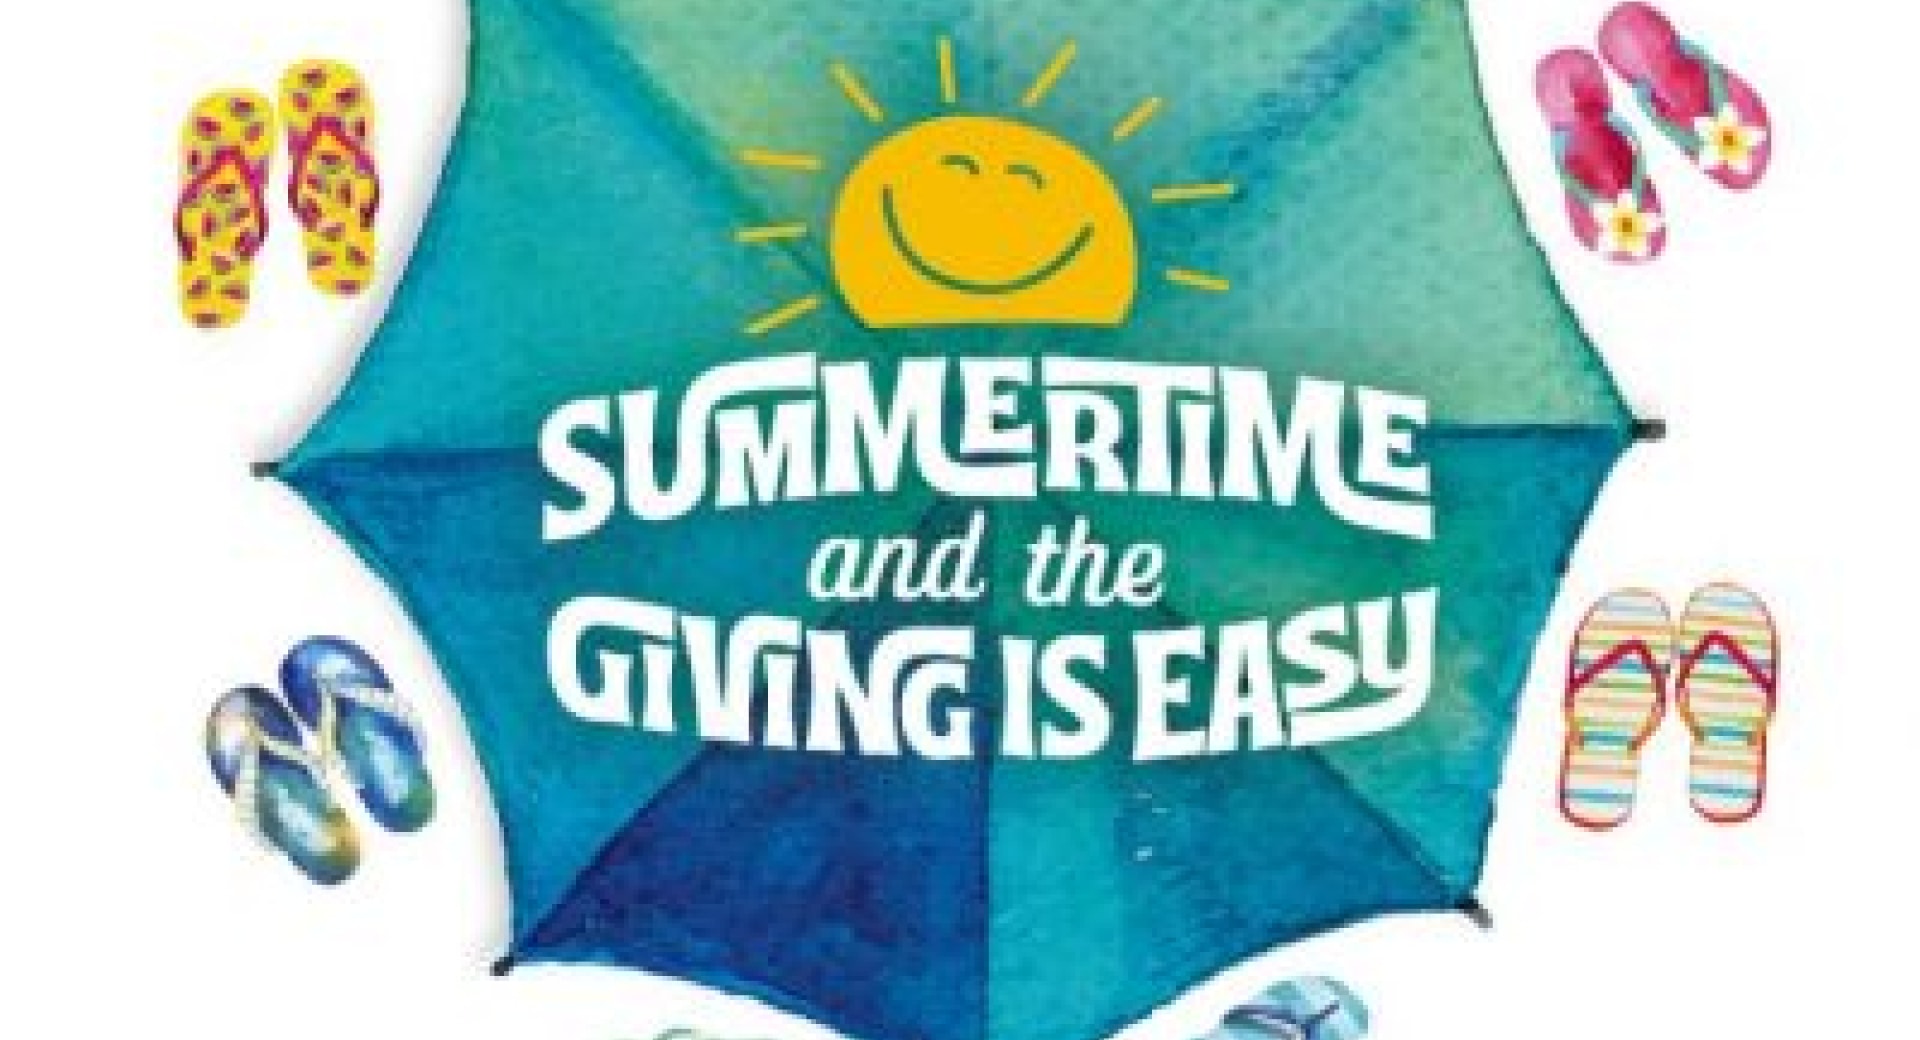 Summertime and the Giving is Easy